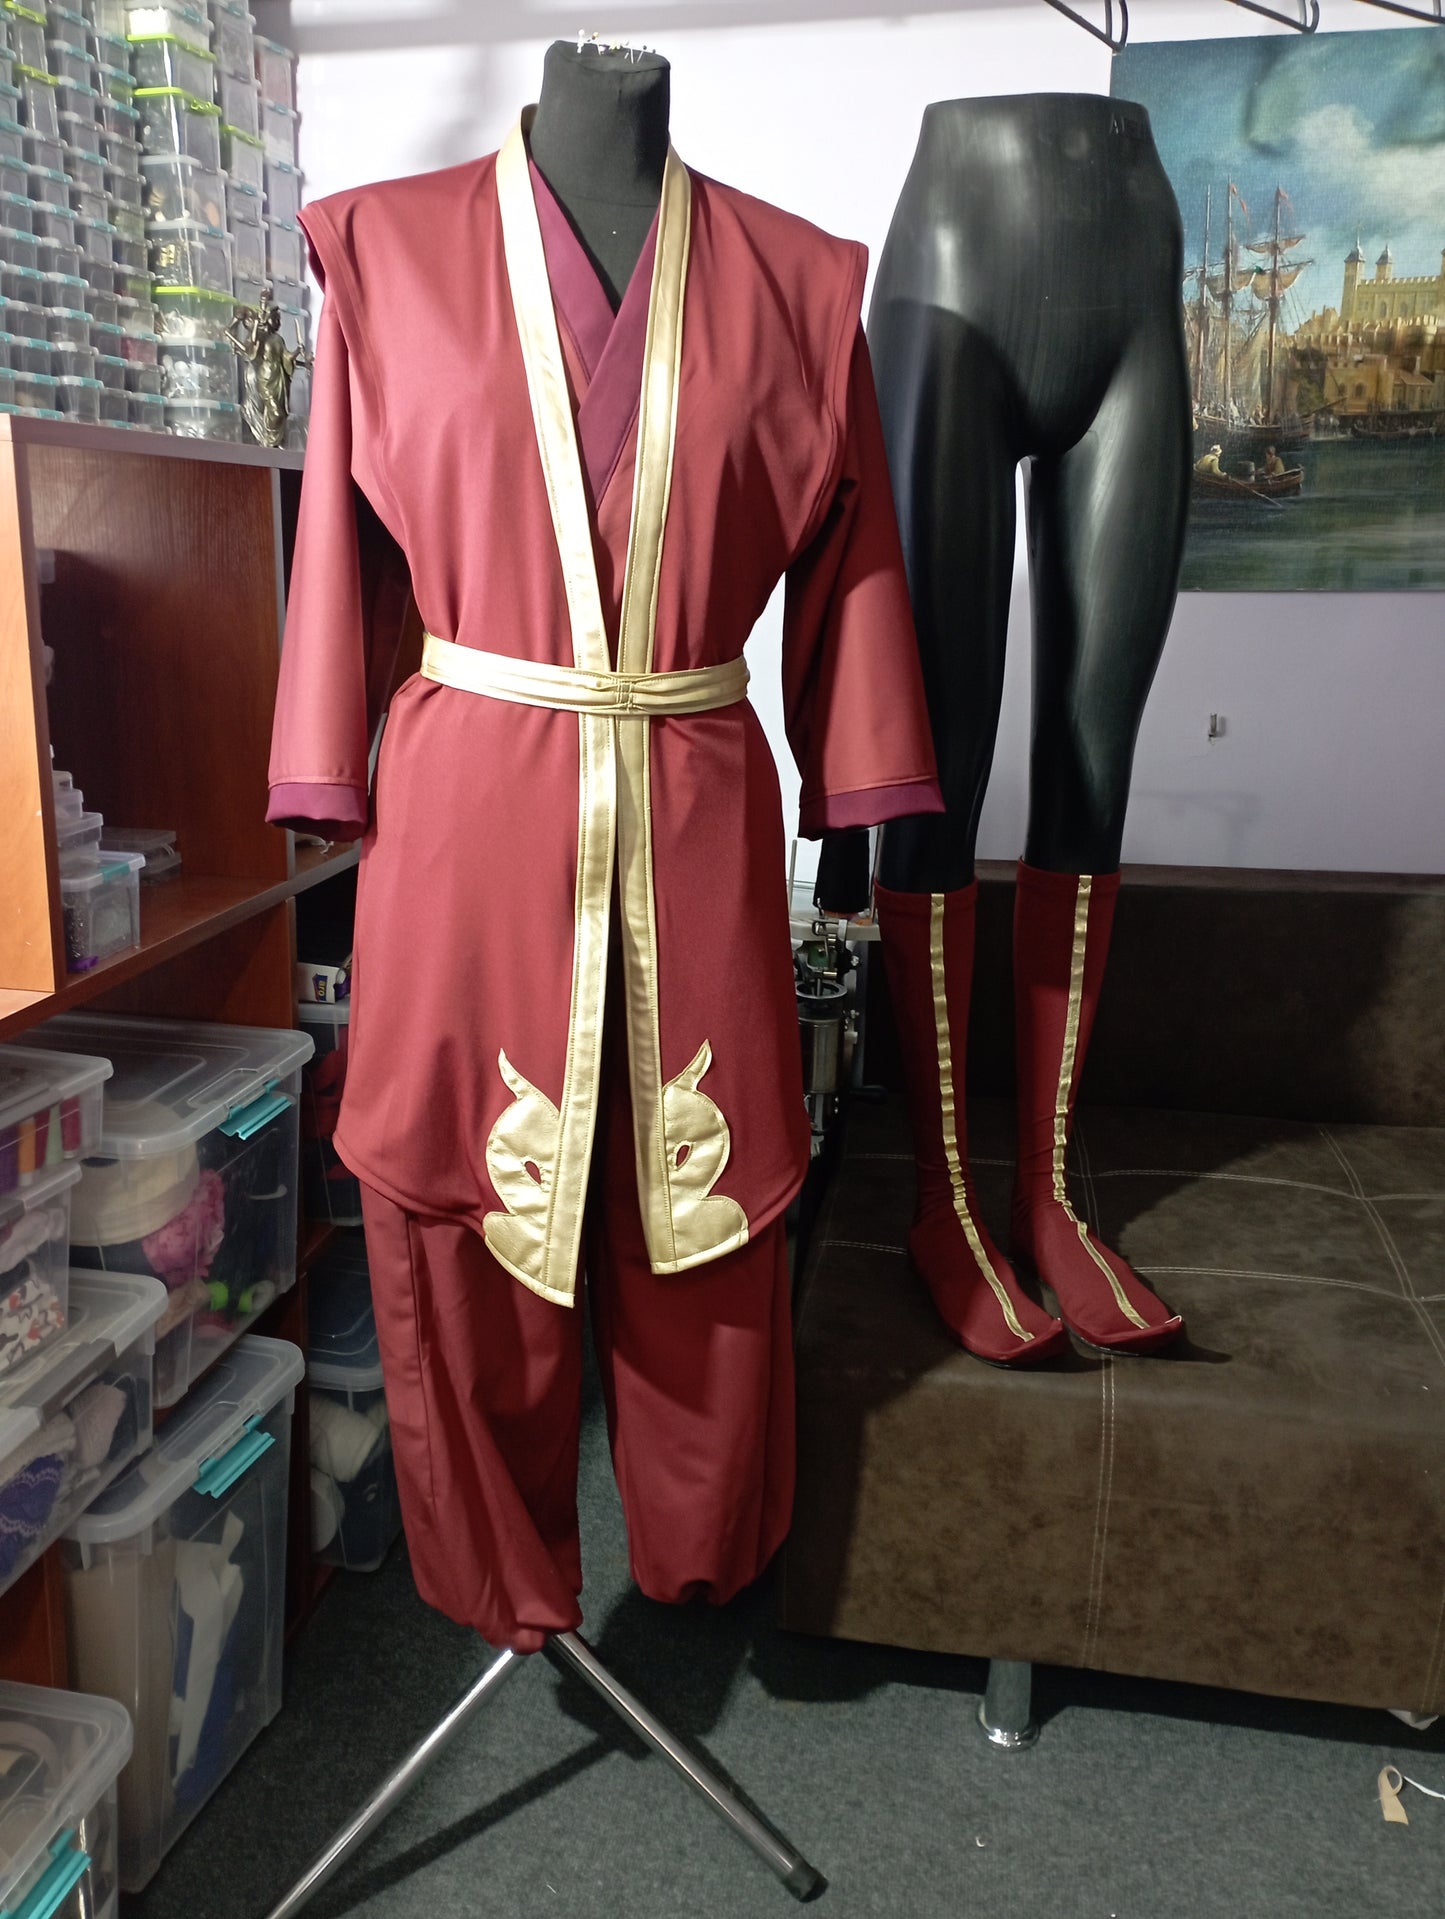 Zuko's outfit from season 3 of Avatar: The Last Airbender